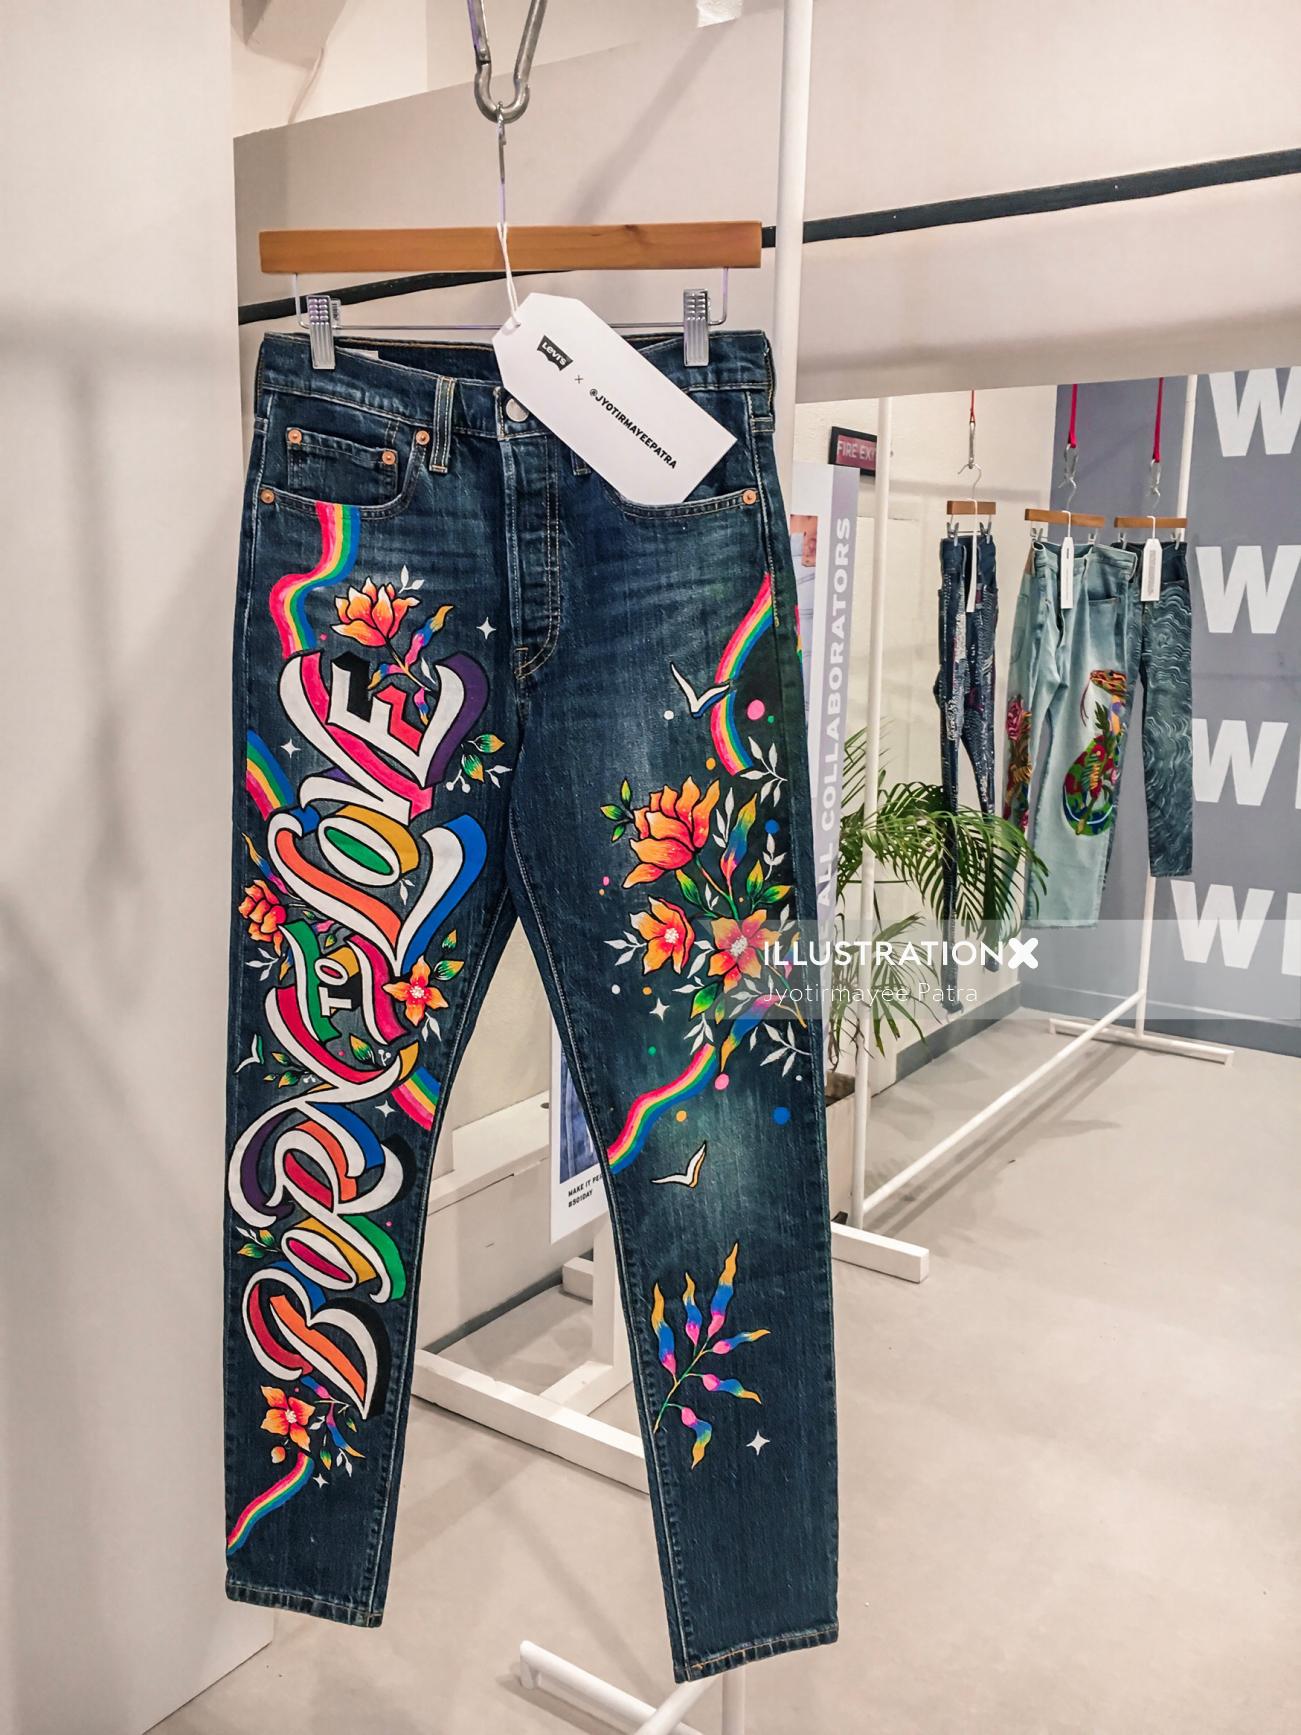 Artist Collaboration with Levi's